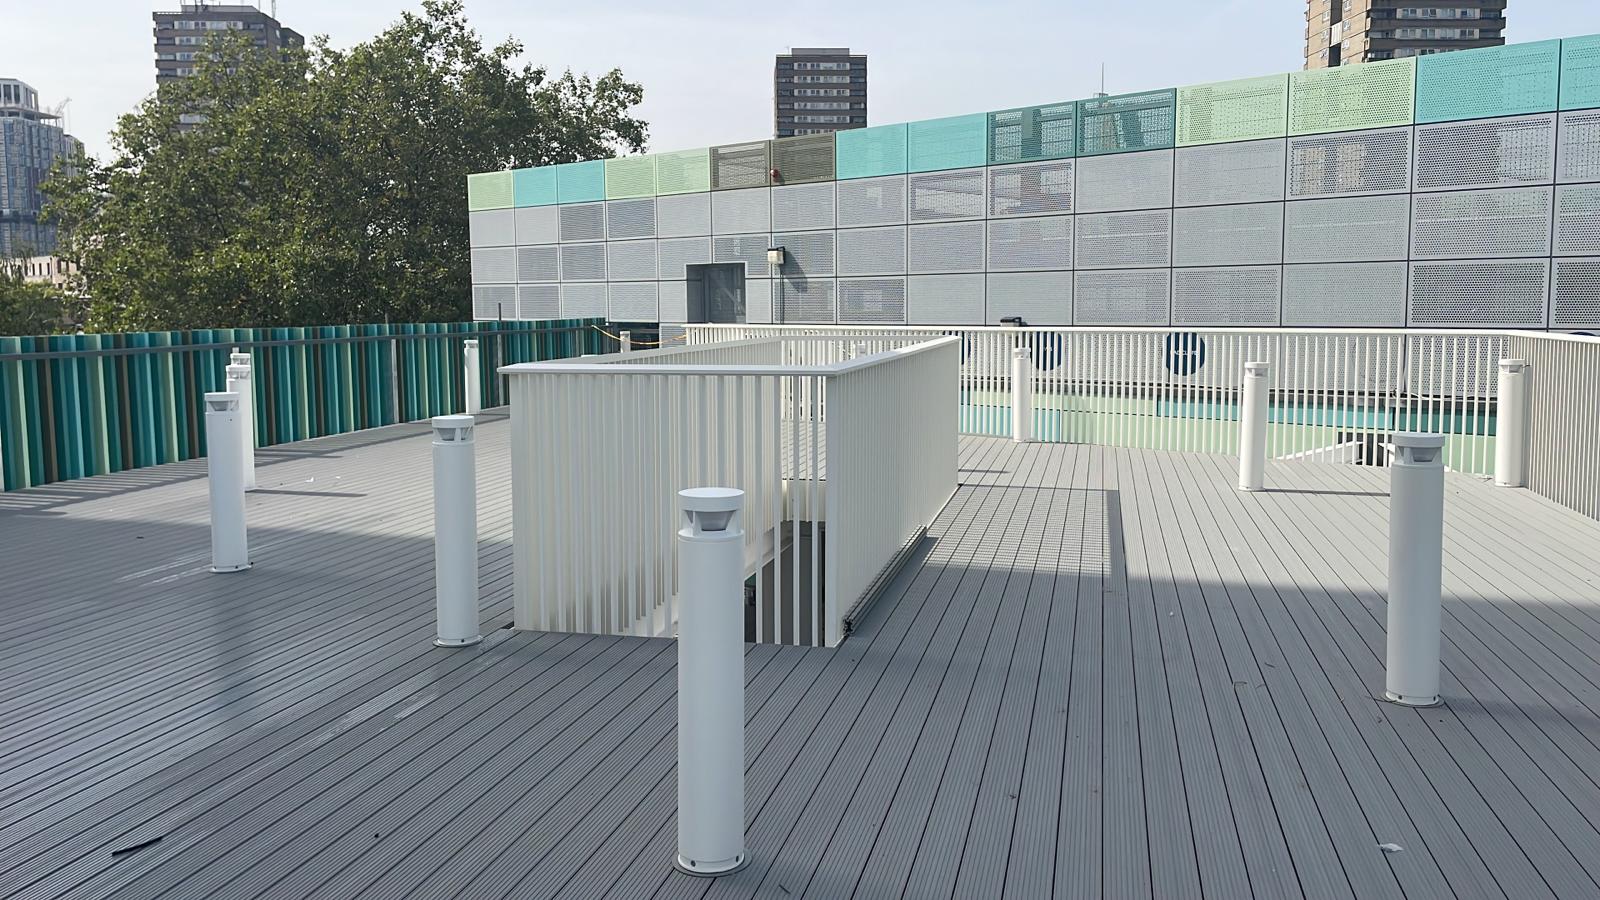 utside-View-of-Aluminium-Balcony-Decking-AliRail-Balustrades-In-London-for-D1-Decking-Solutions-Kensington-Academy-Project